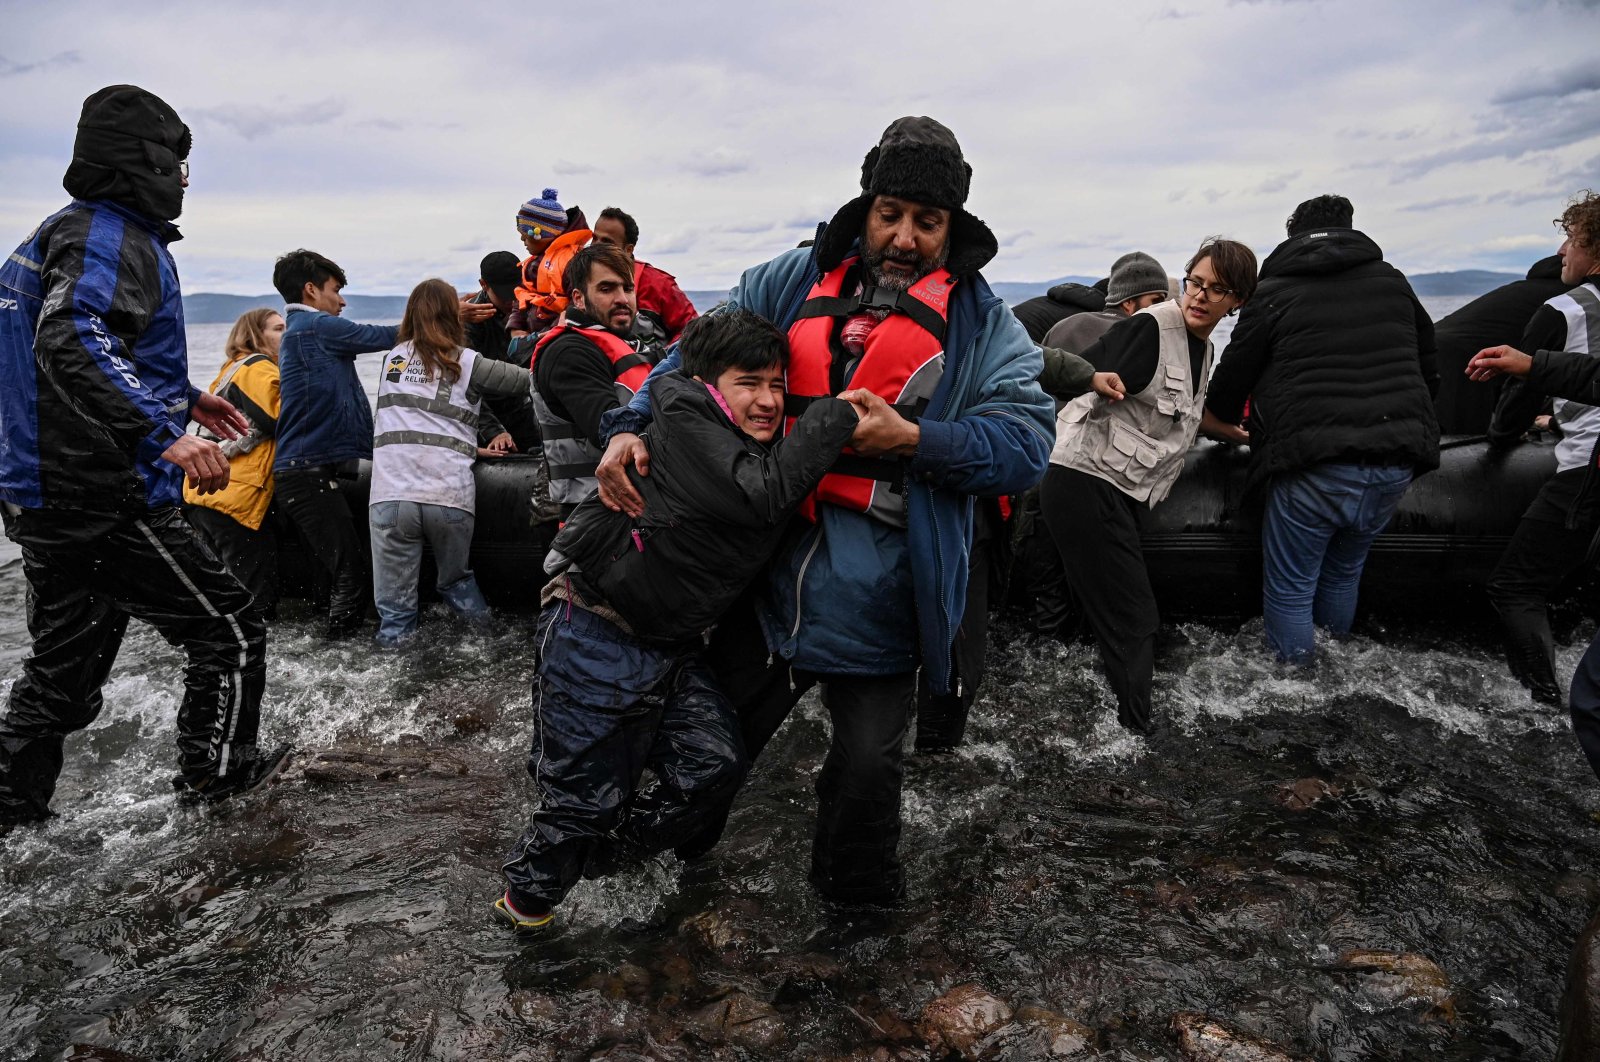 A dinghy transporting 54 Afghan refugees lands in Lesbos island after crossing the Aegean sea between Turkey and Greece on Feb. 28, 2020.  (AFP Photo)